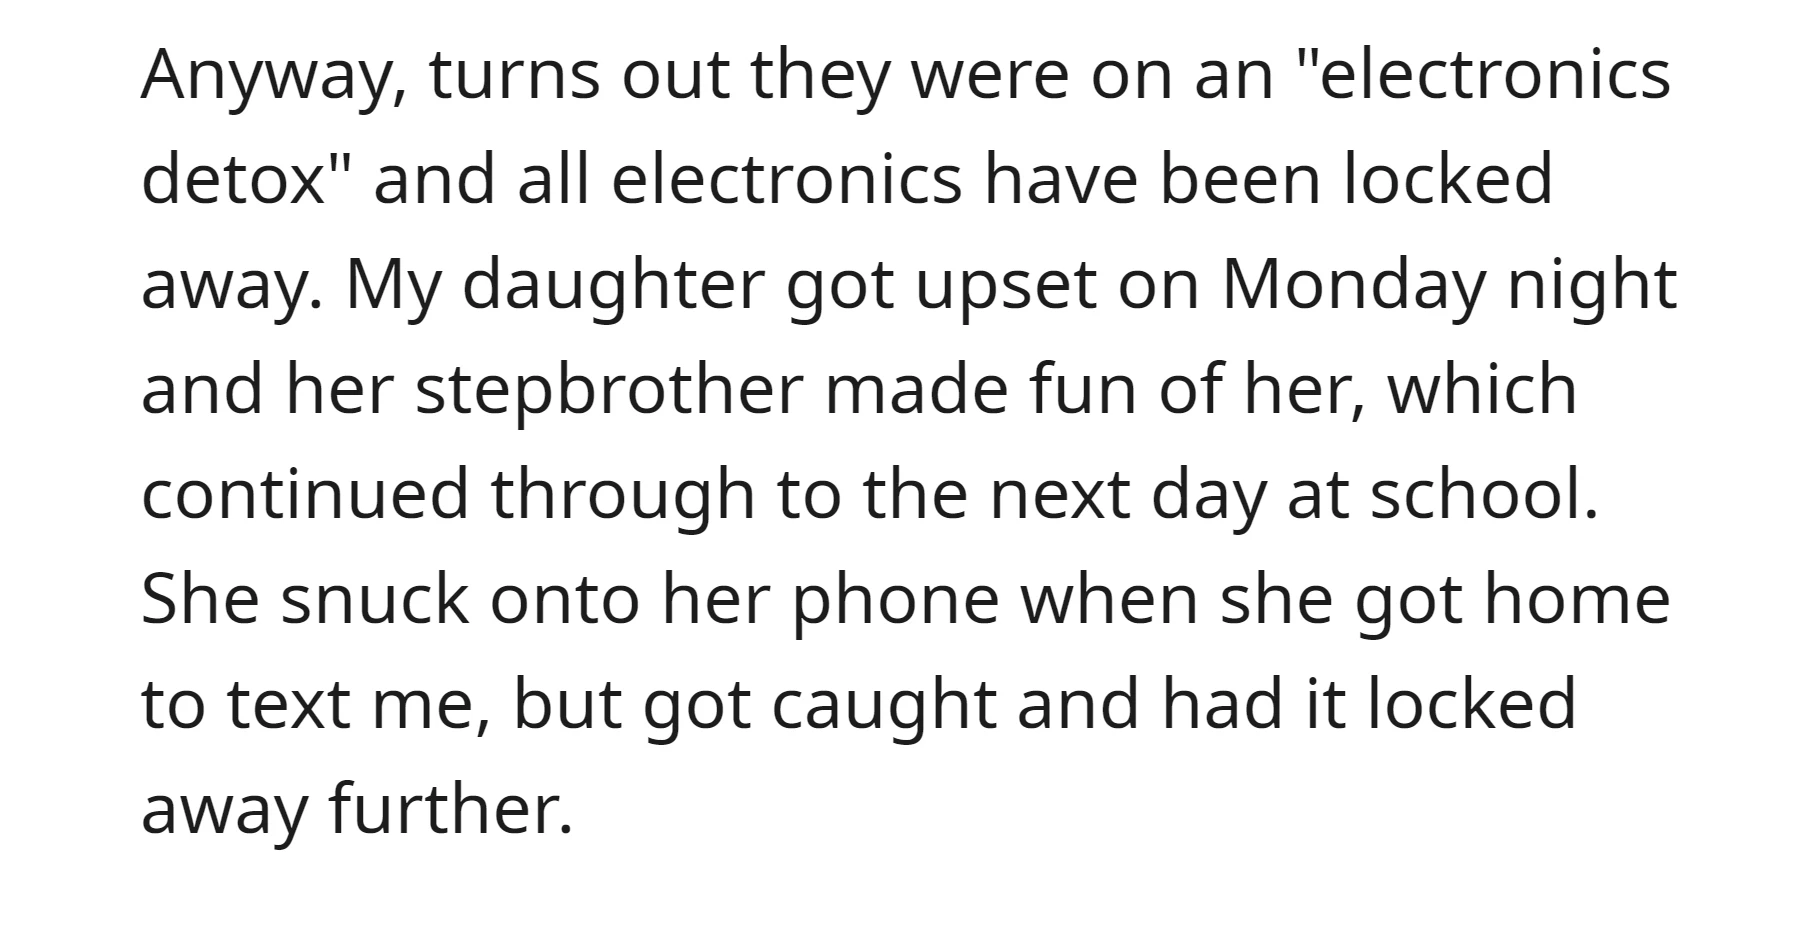 The daughter was on an "electronics detox"